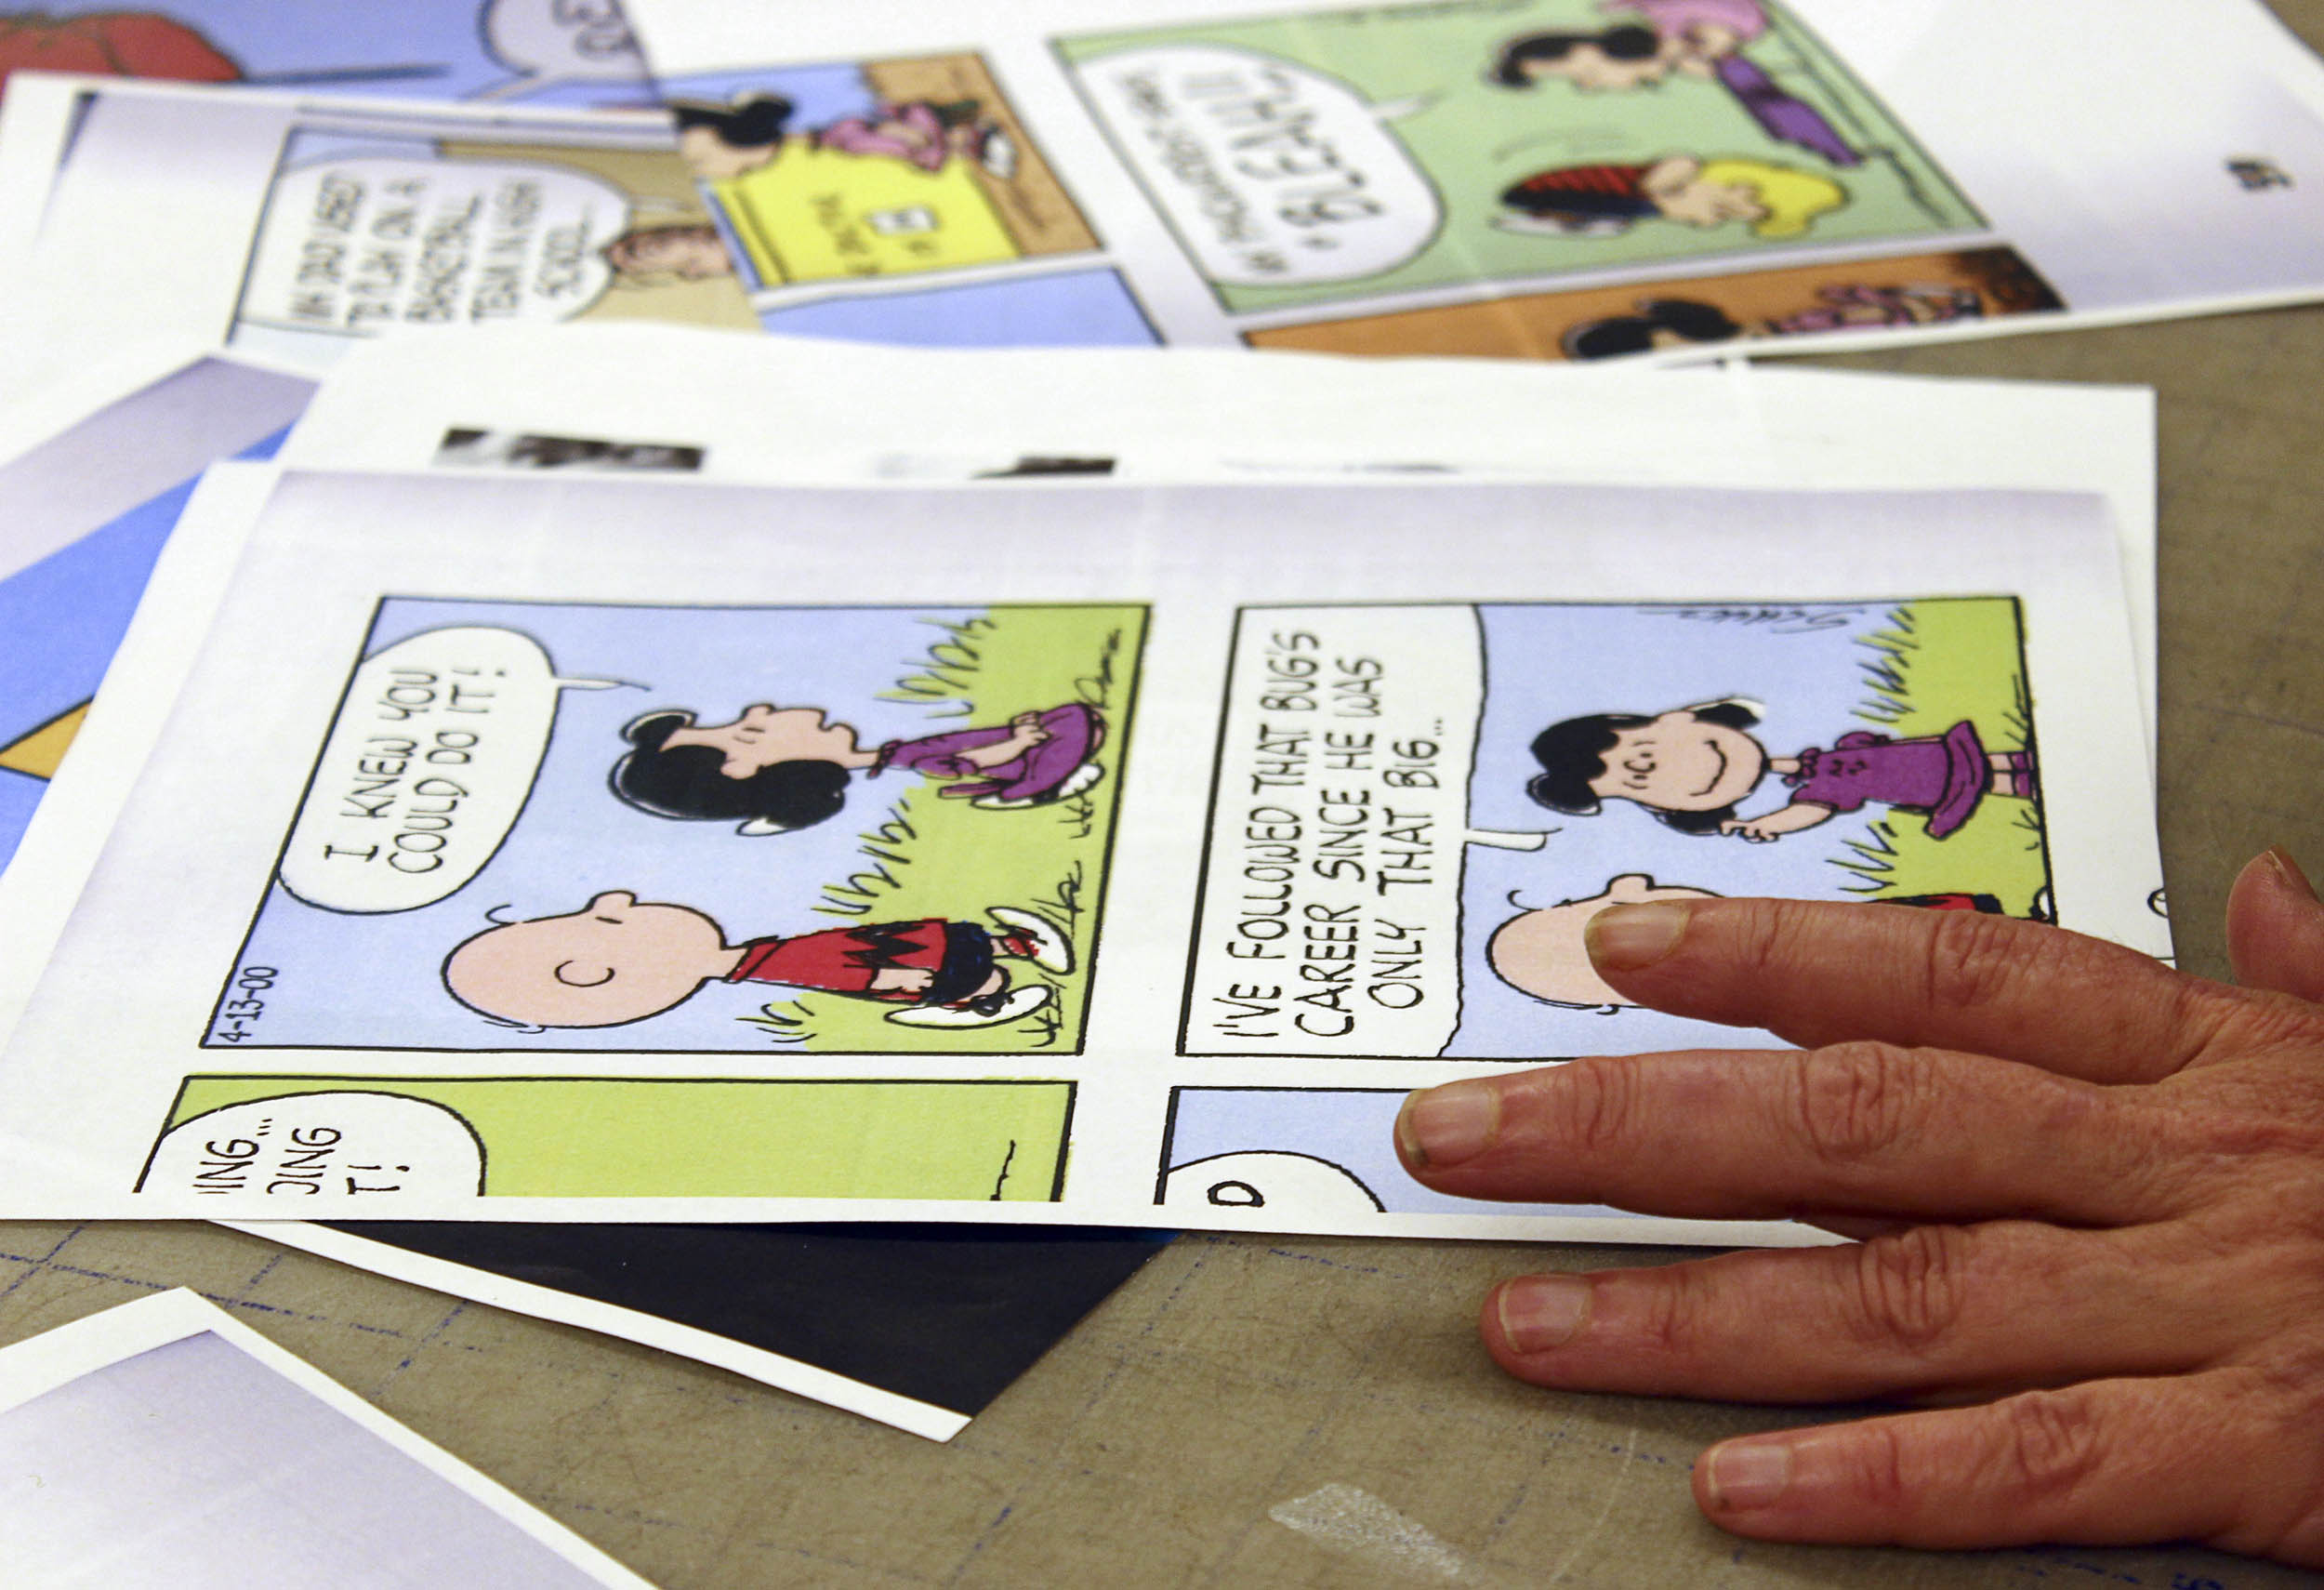 Smith flips through inspirations for the costumes in “You’re a Good Man, Charlie Brown,” which ran this July.